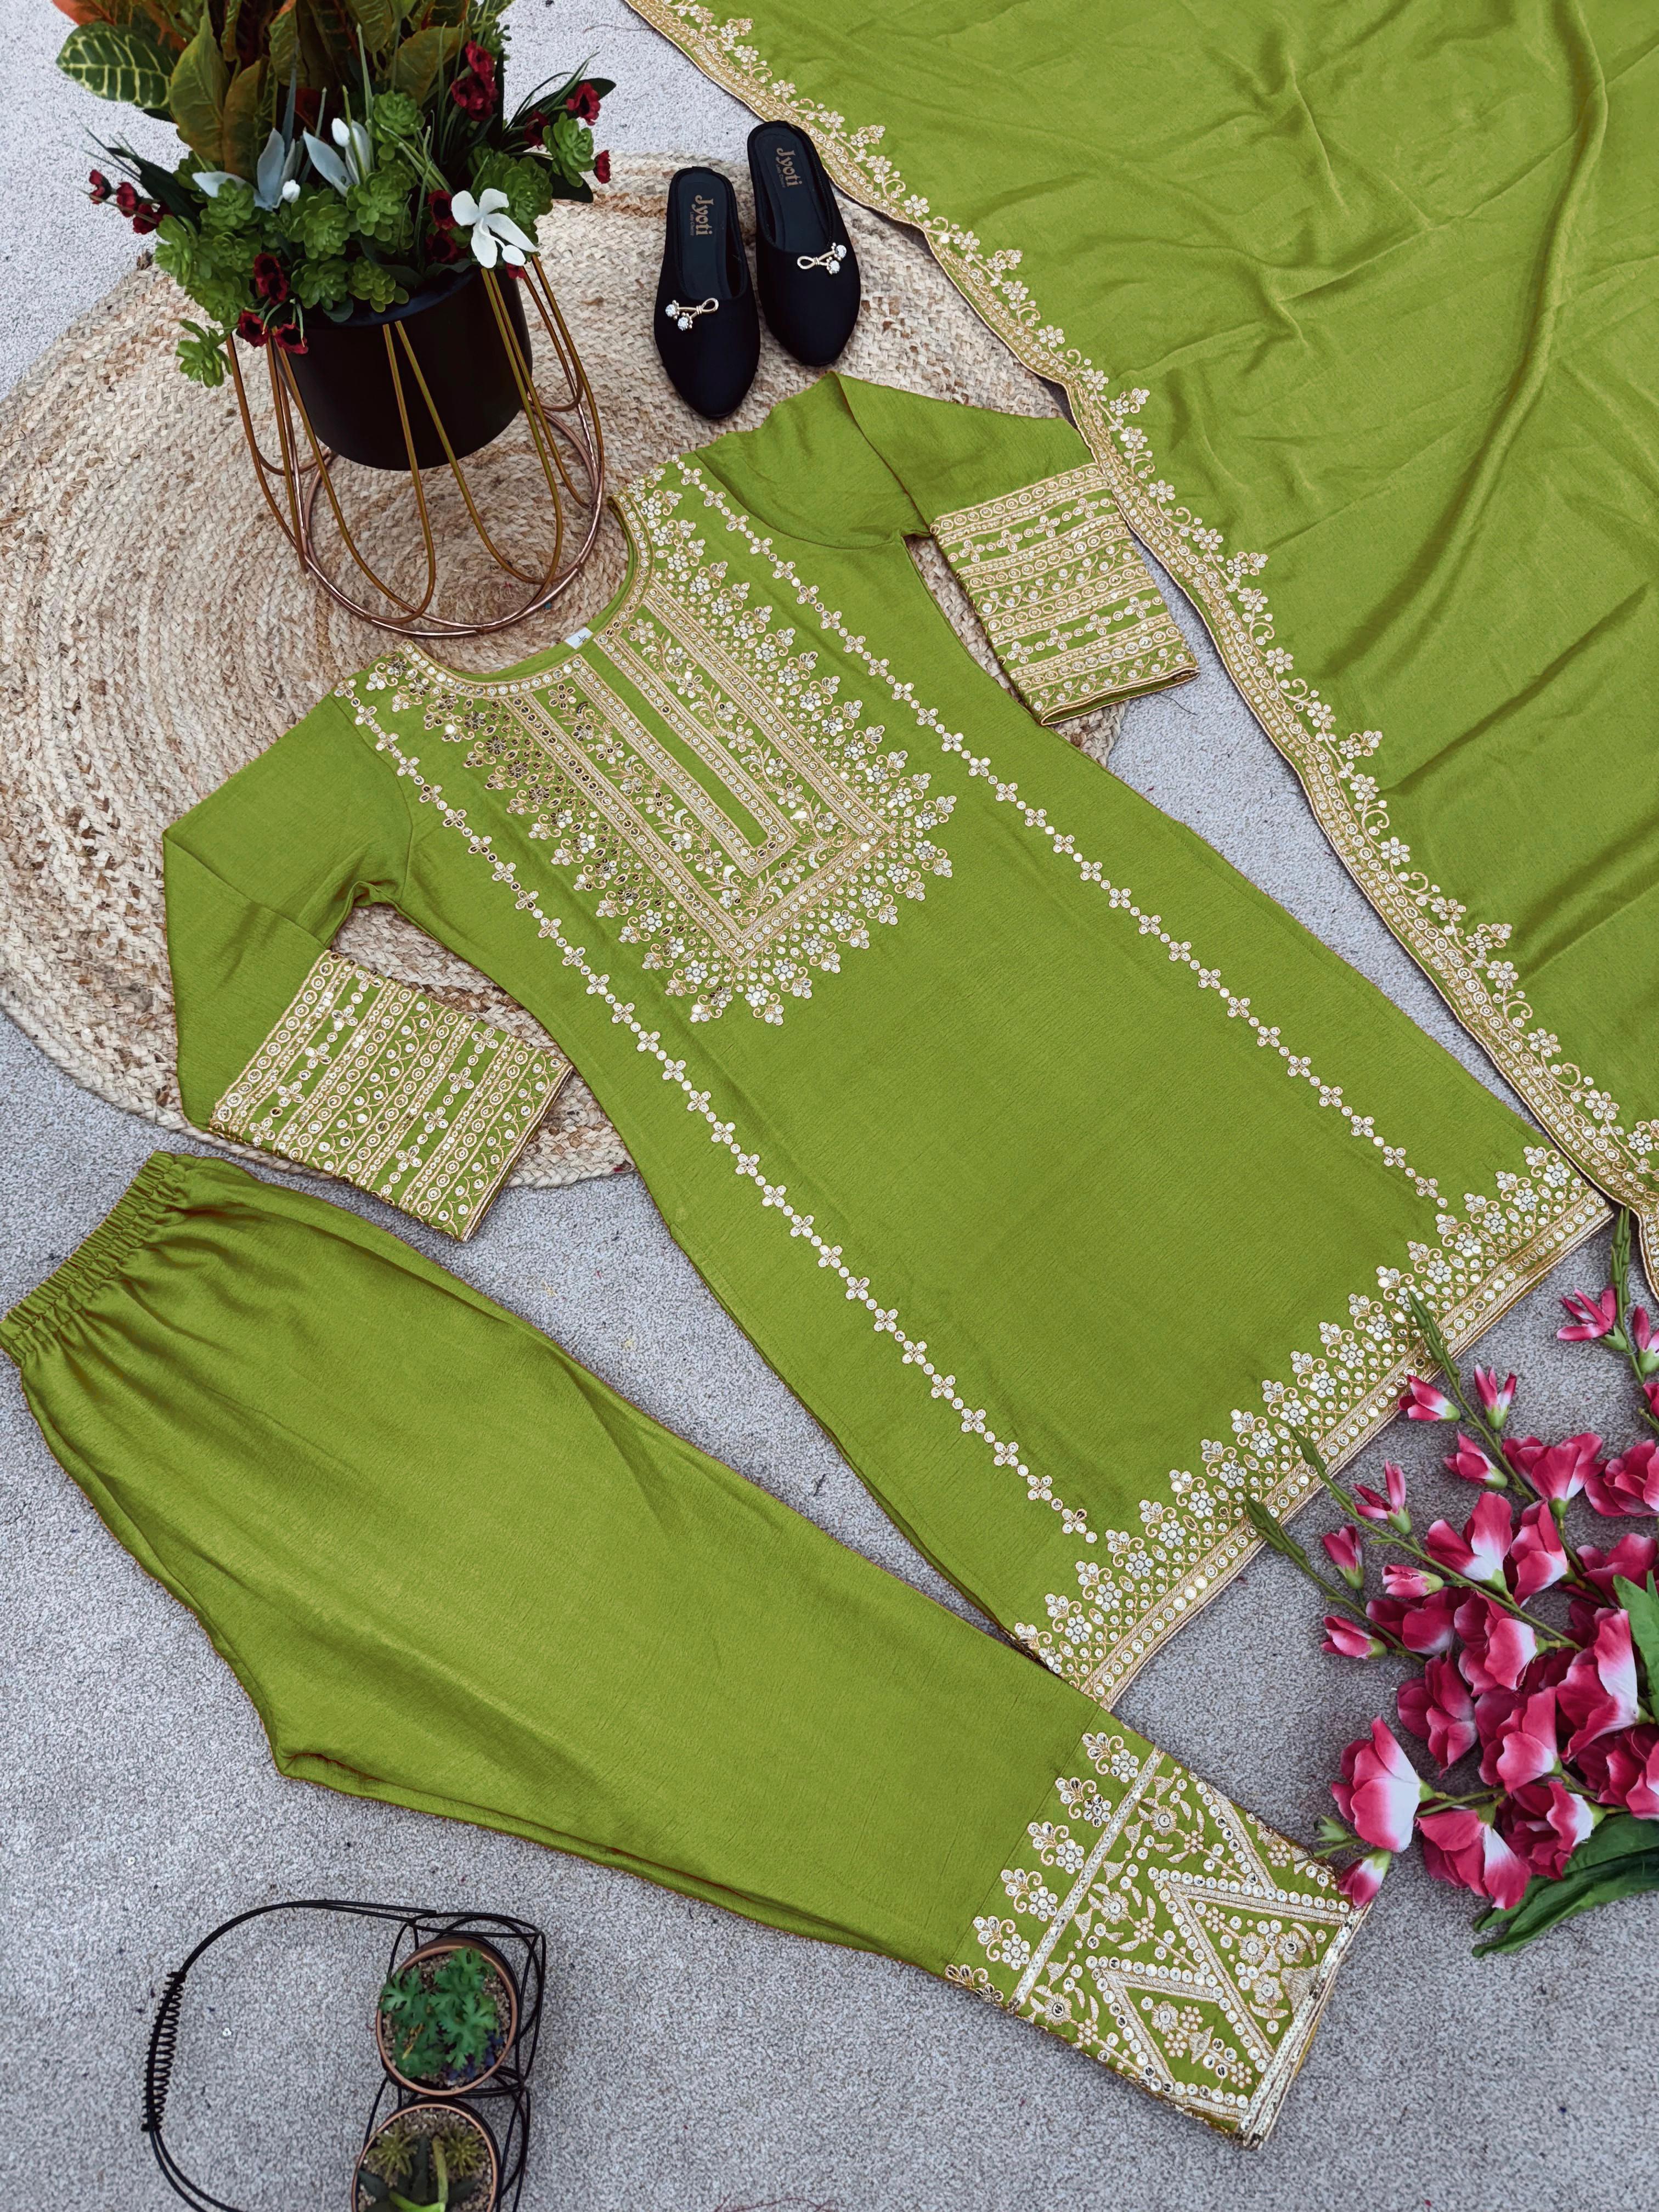 Exclusive Full Sleeve With Work Parrot Green Color Salwar Suit